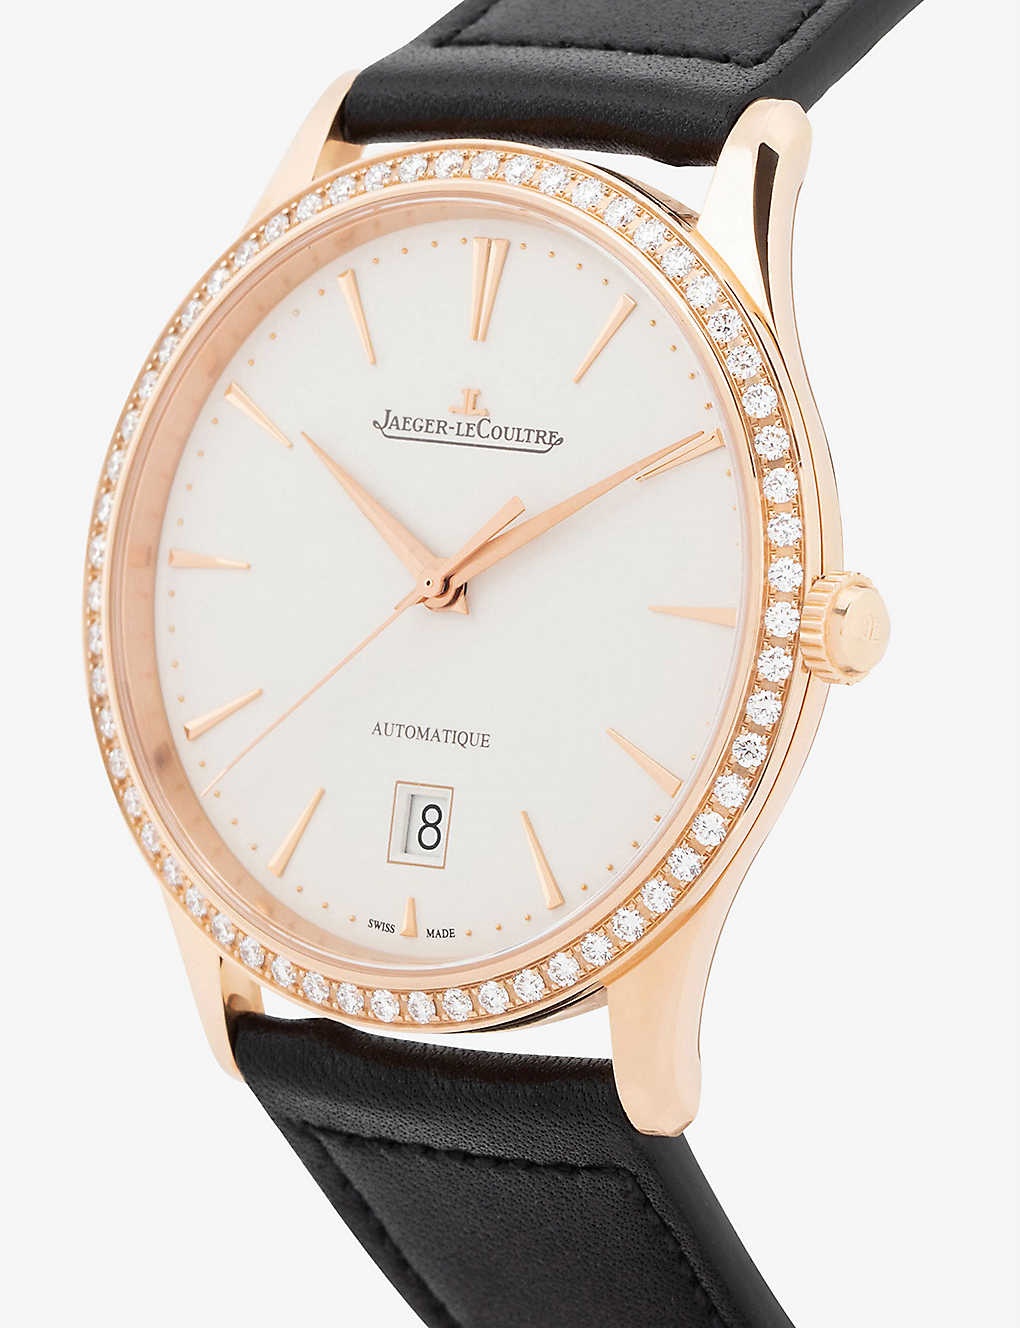 Q1232501 Master Ultra Thin rose-gold, 0.85ct diamond and calfskin-leather watch - 2